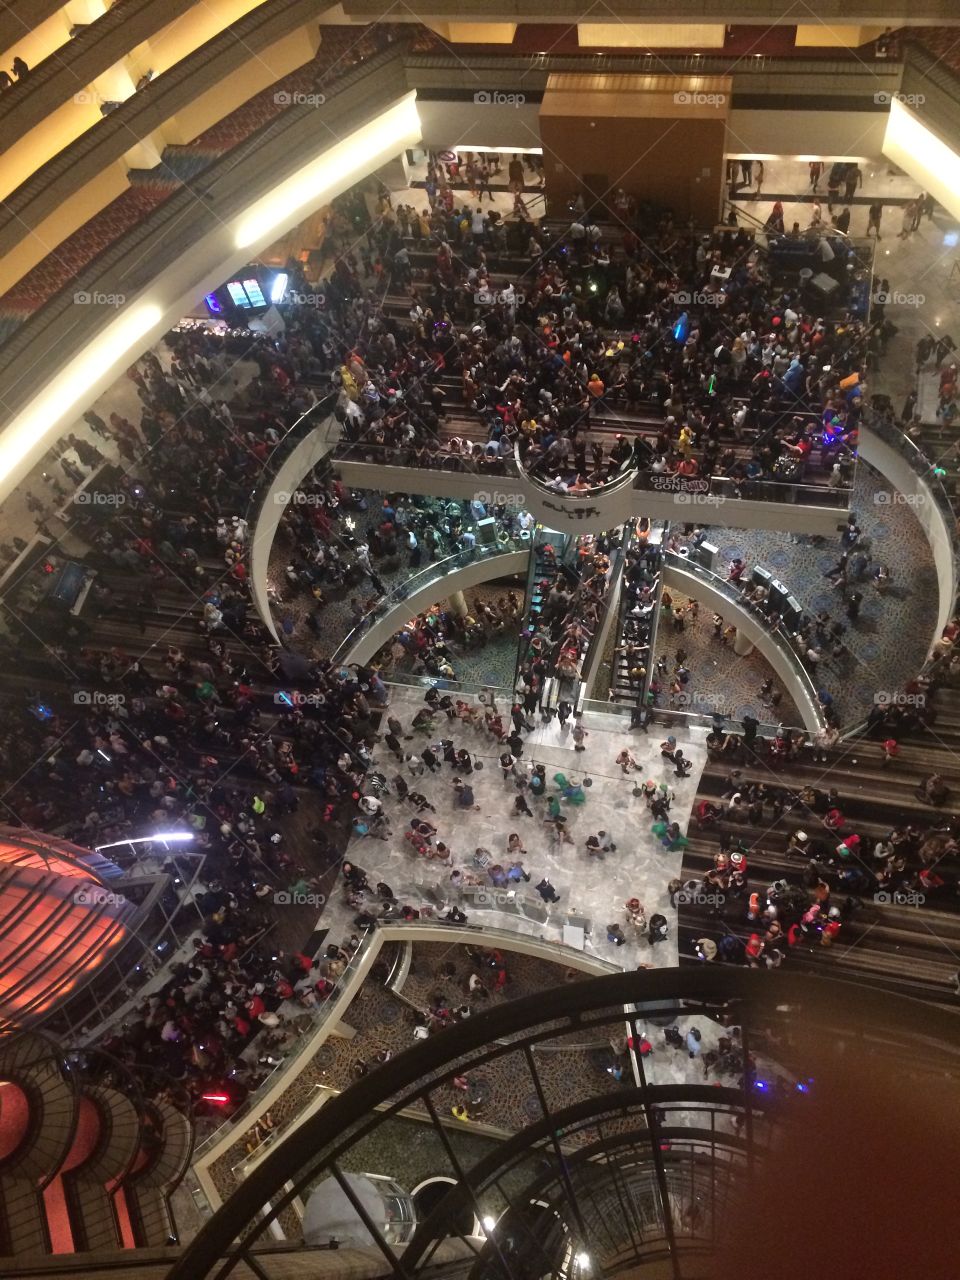 Ariel view of crowd at Dragoncon convention in the Marriott in Atlanta Georgia. 